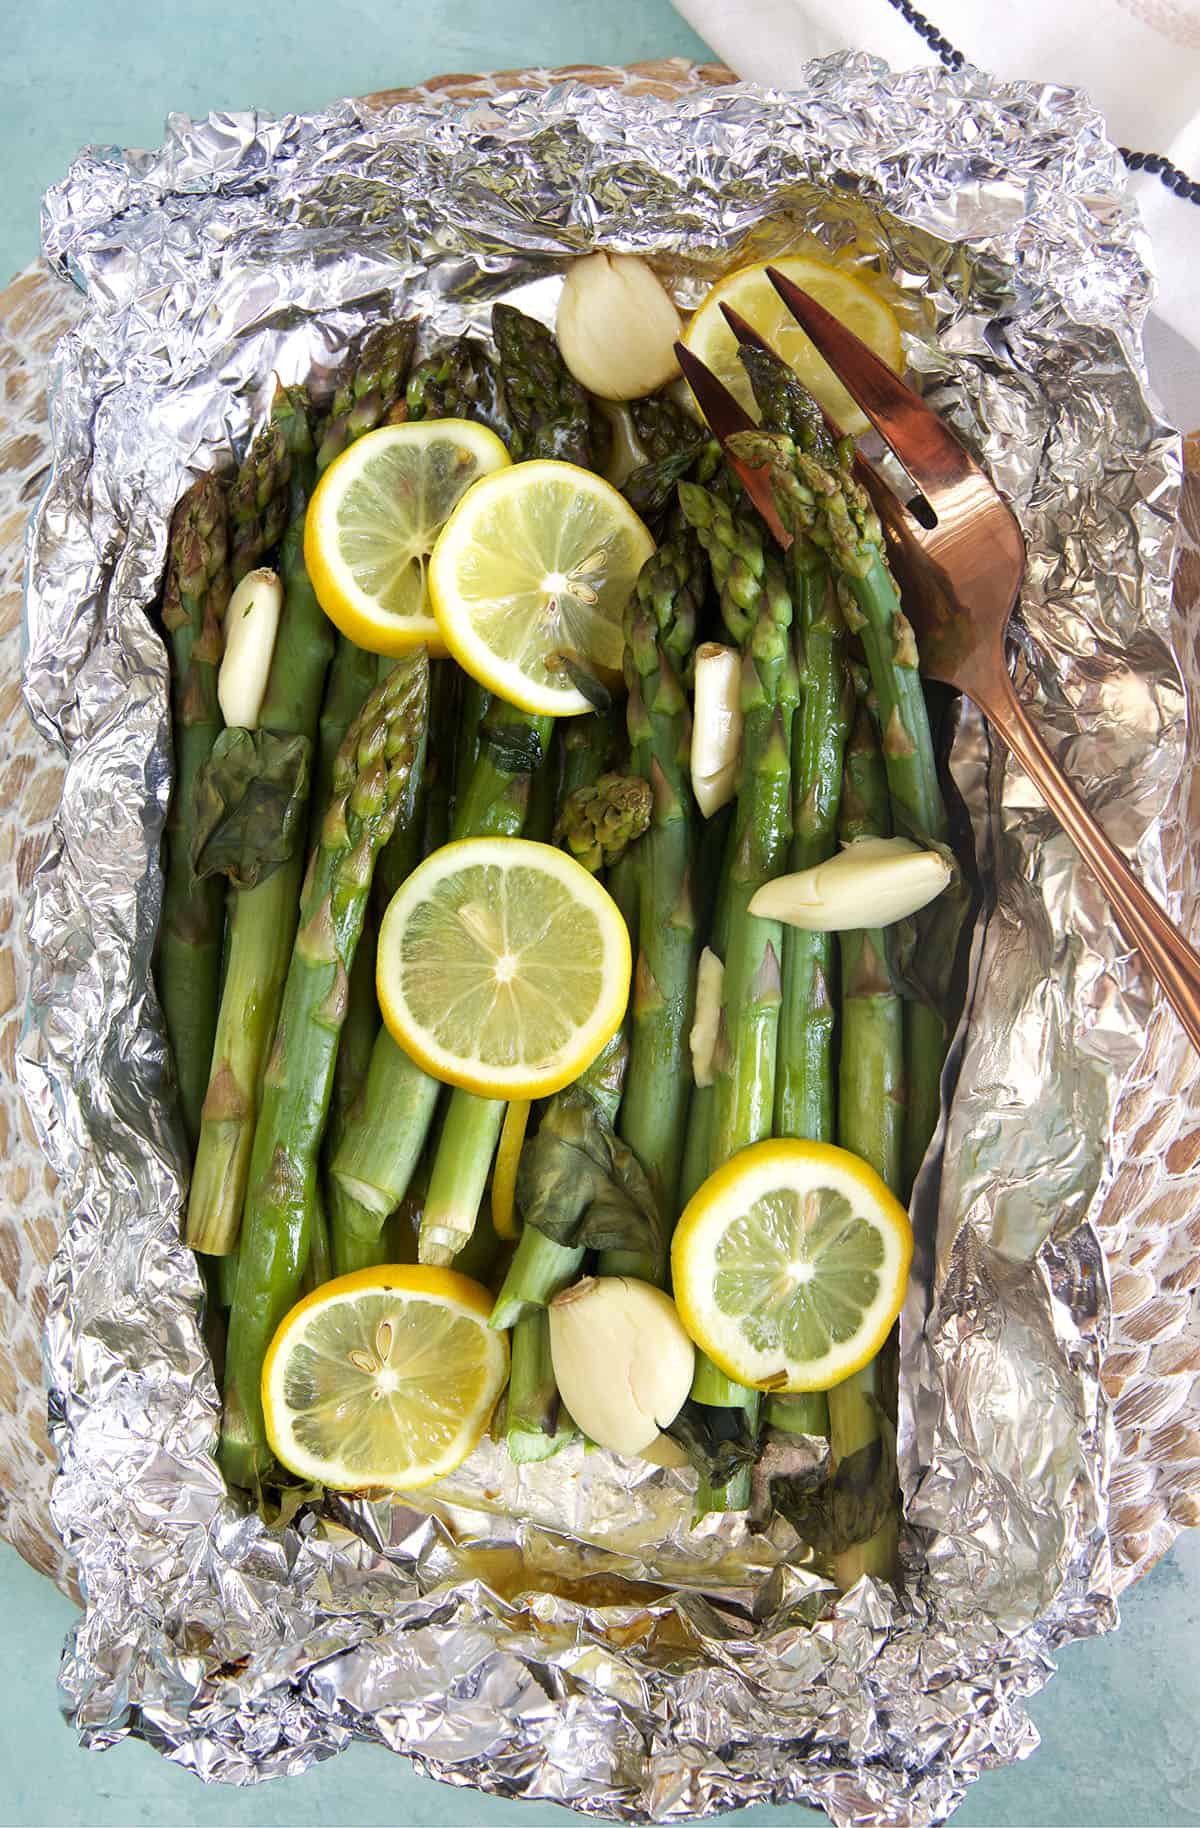 Asparagus is cooked and wrapped in foil, topped with lemon slices. 